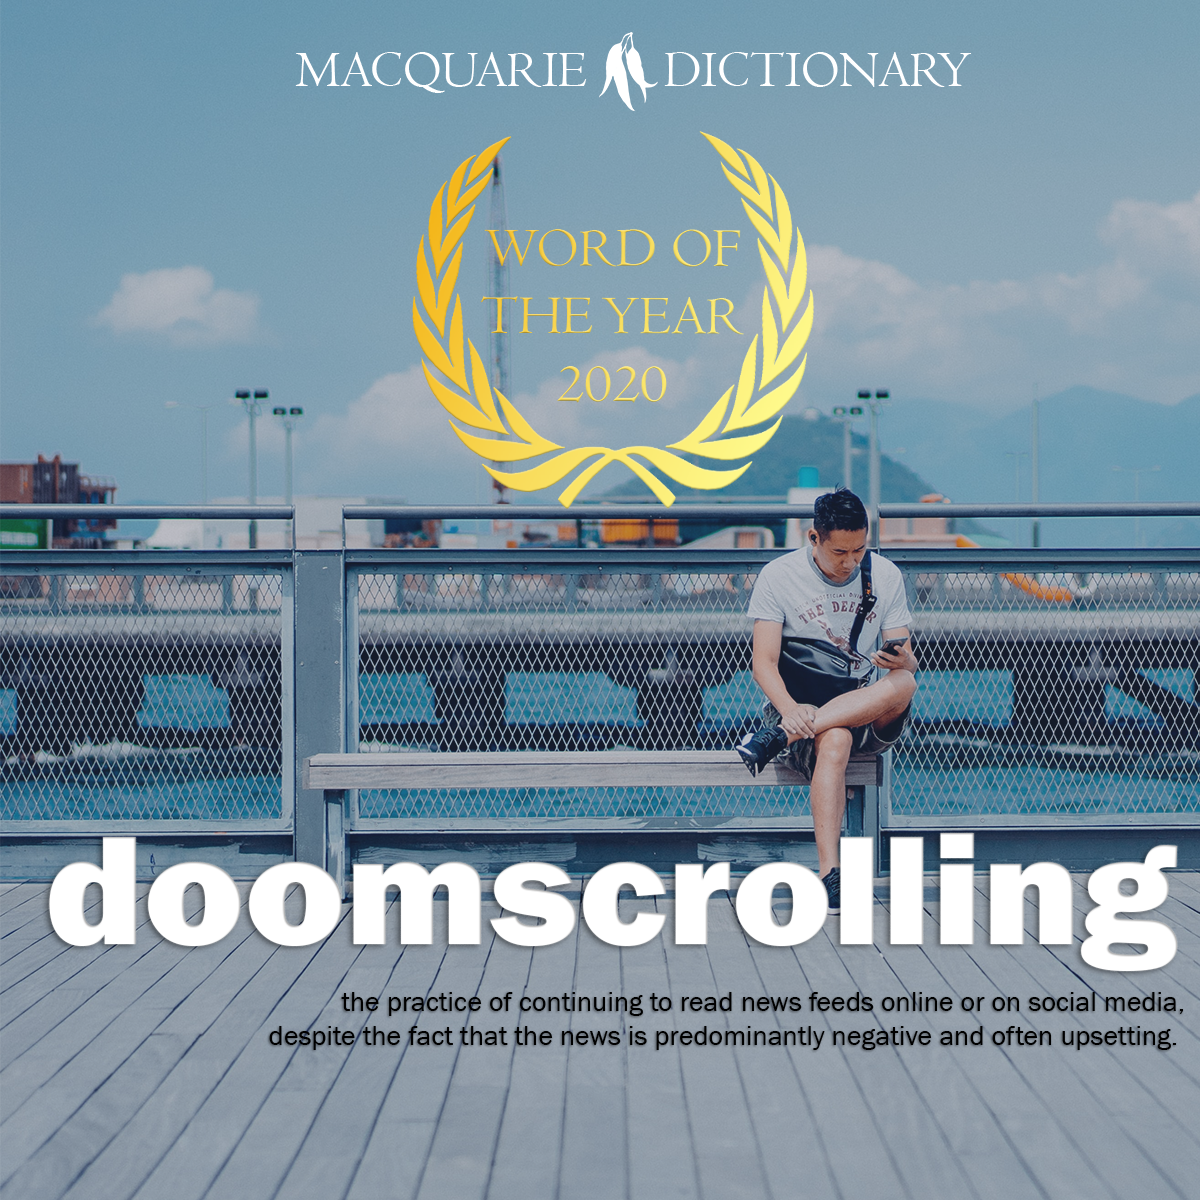 doomscrolling - the practice of continuing to read news feeds online or on social media, despite the fact that the news is predominantly negative and often upsetting. 